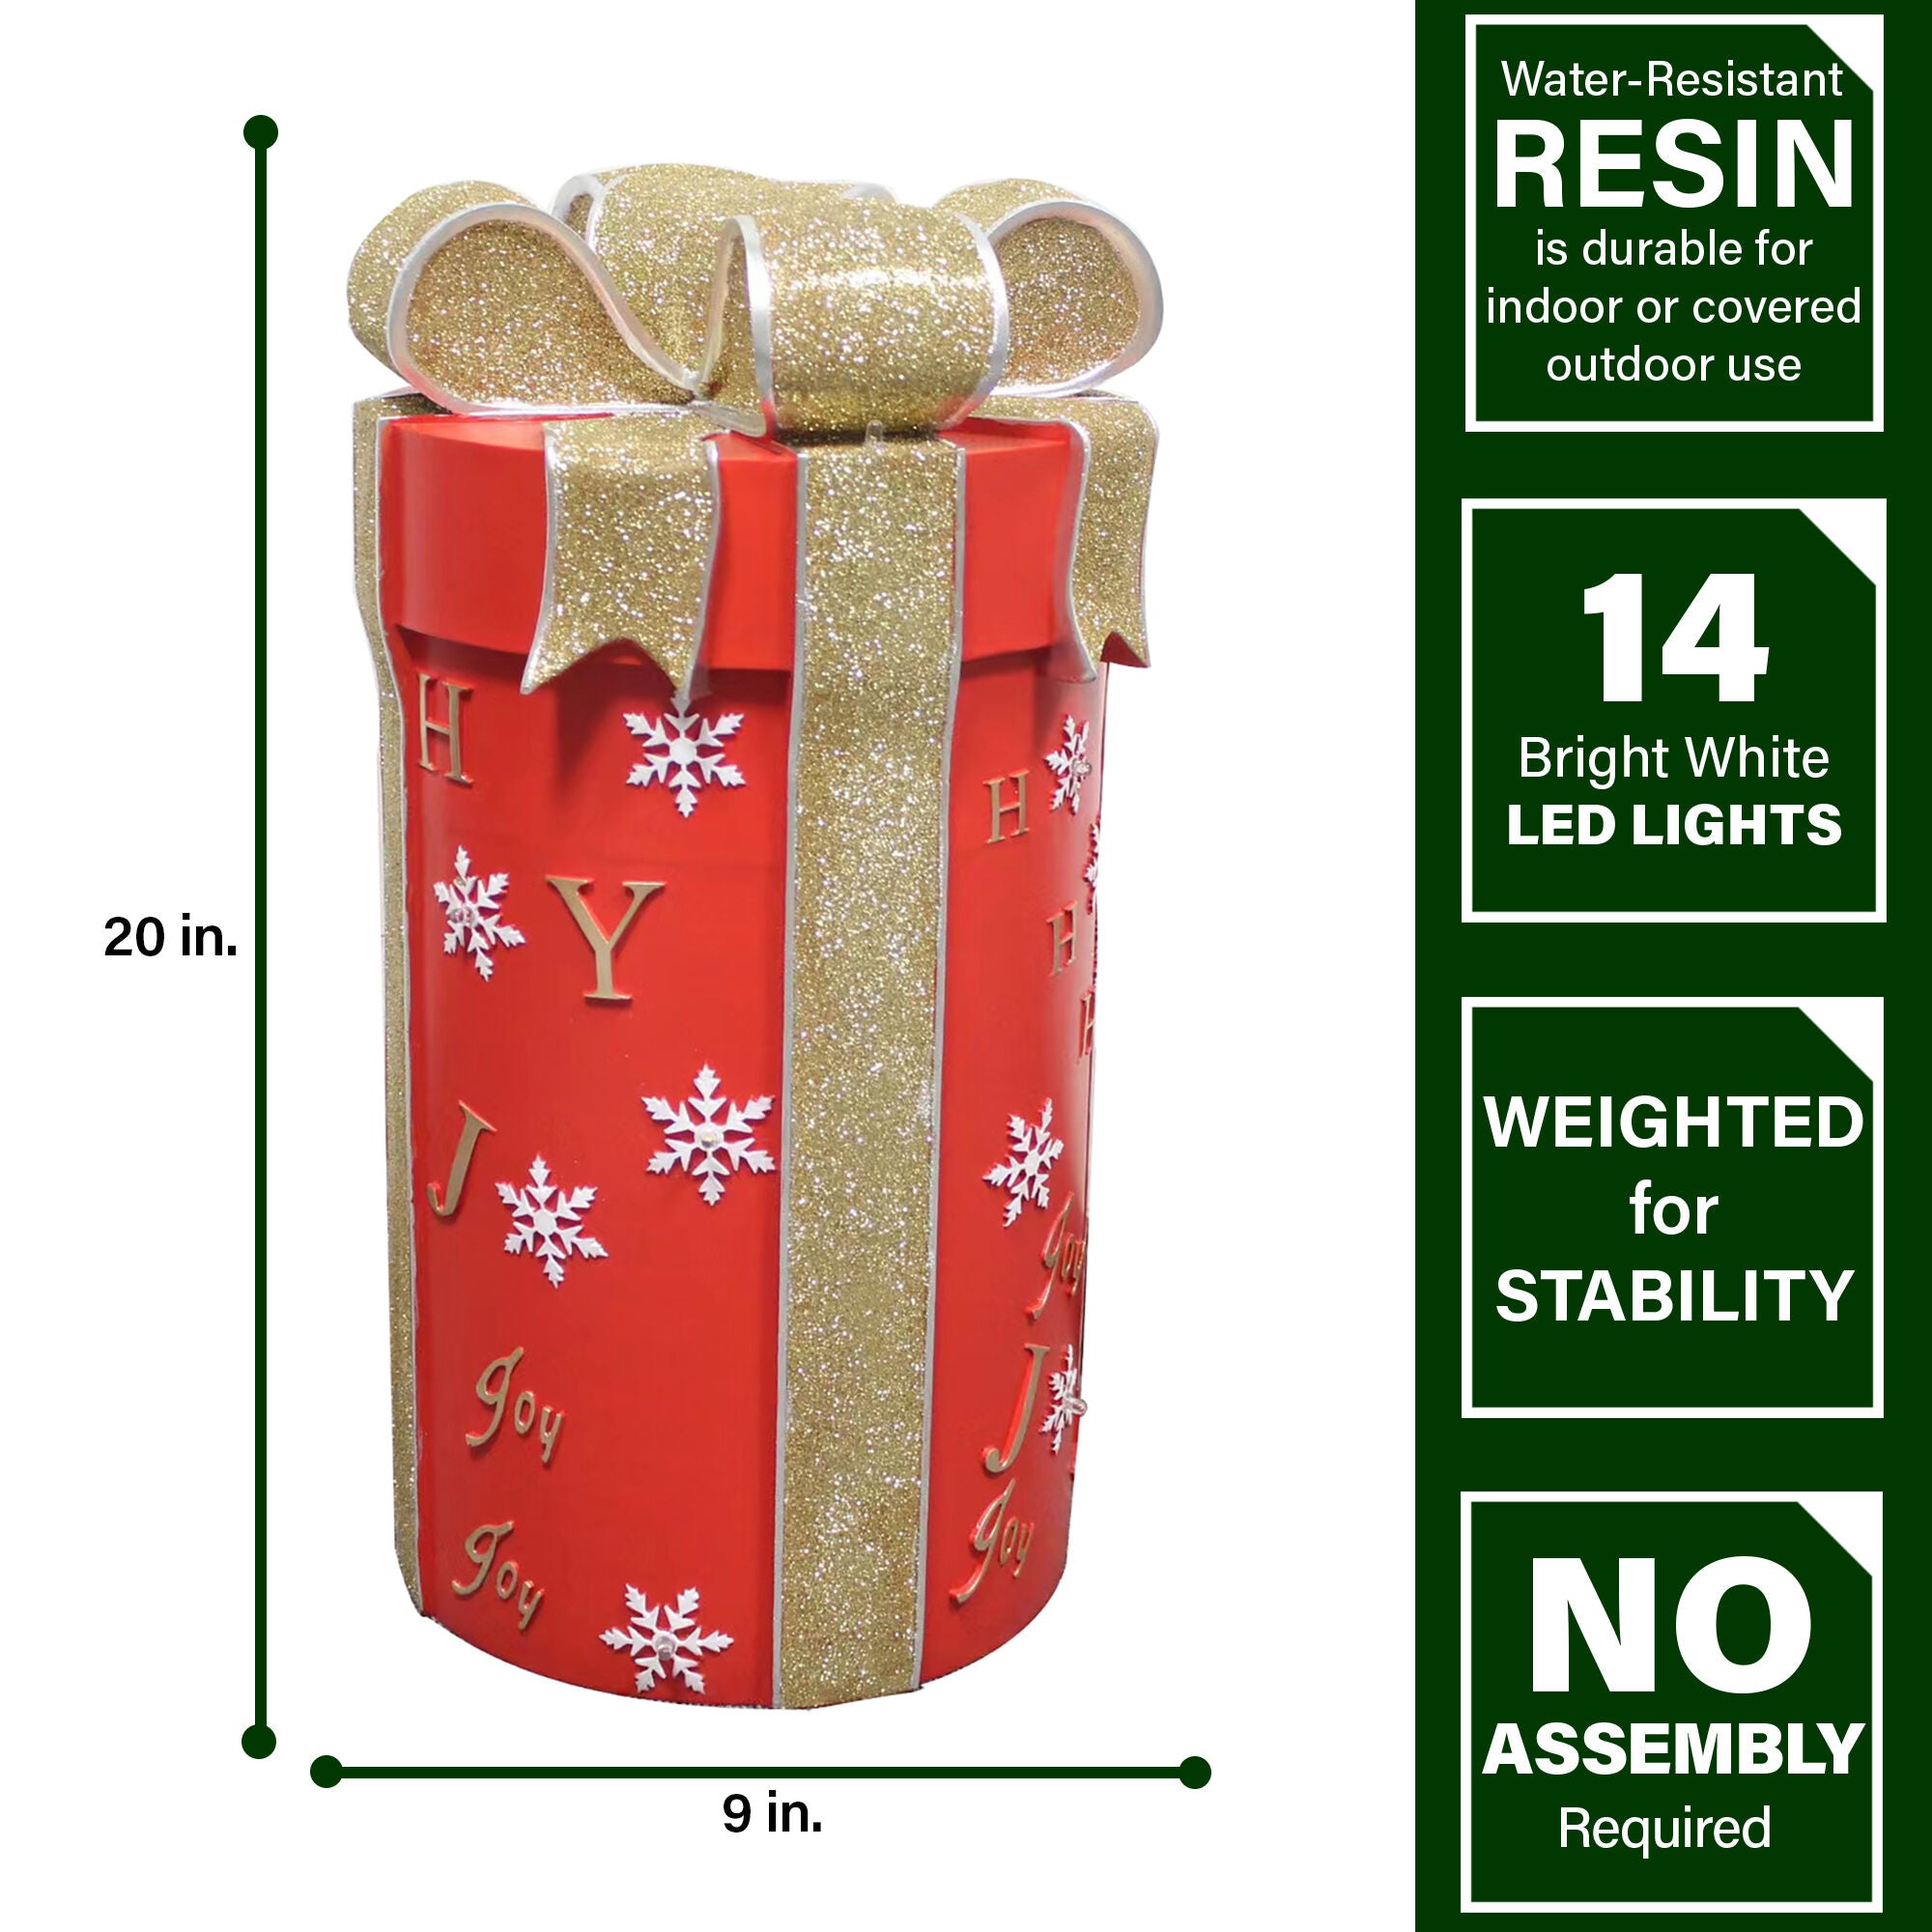 Fraser Hill Farm -  20-In. Red Round Gift Box with Gold Bow and LED Lights, Festive Indoor Christmas Holiday Decorations, Plug-In